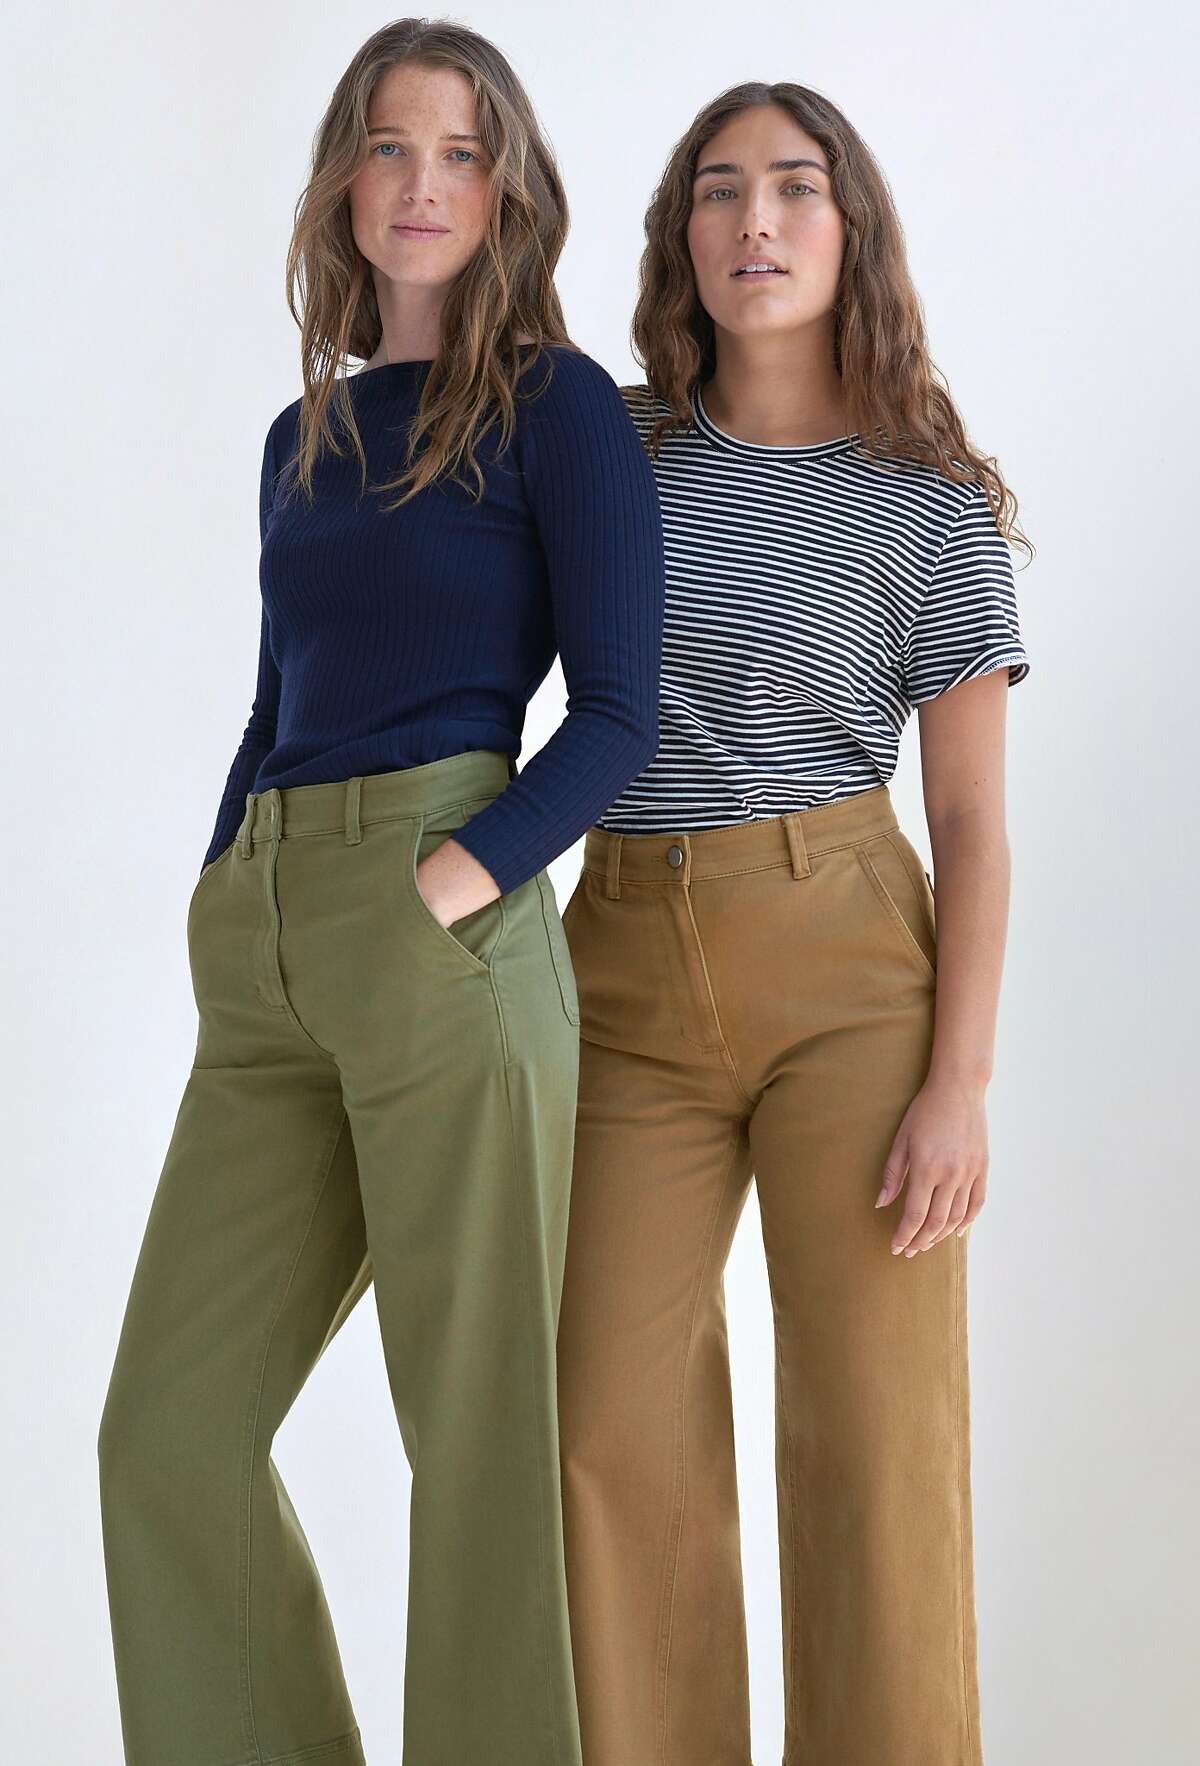 How to Wear Wide Legged Cropped Pants